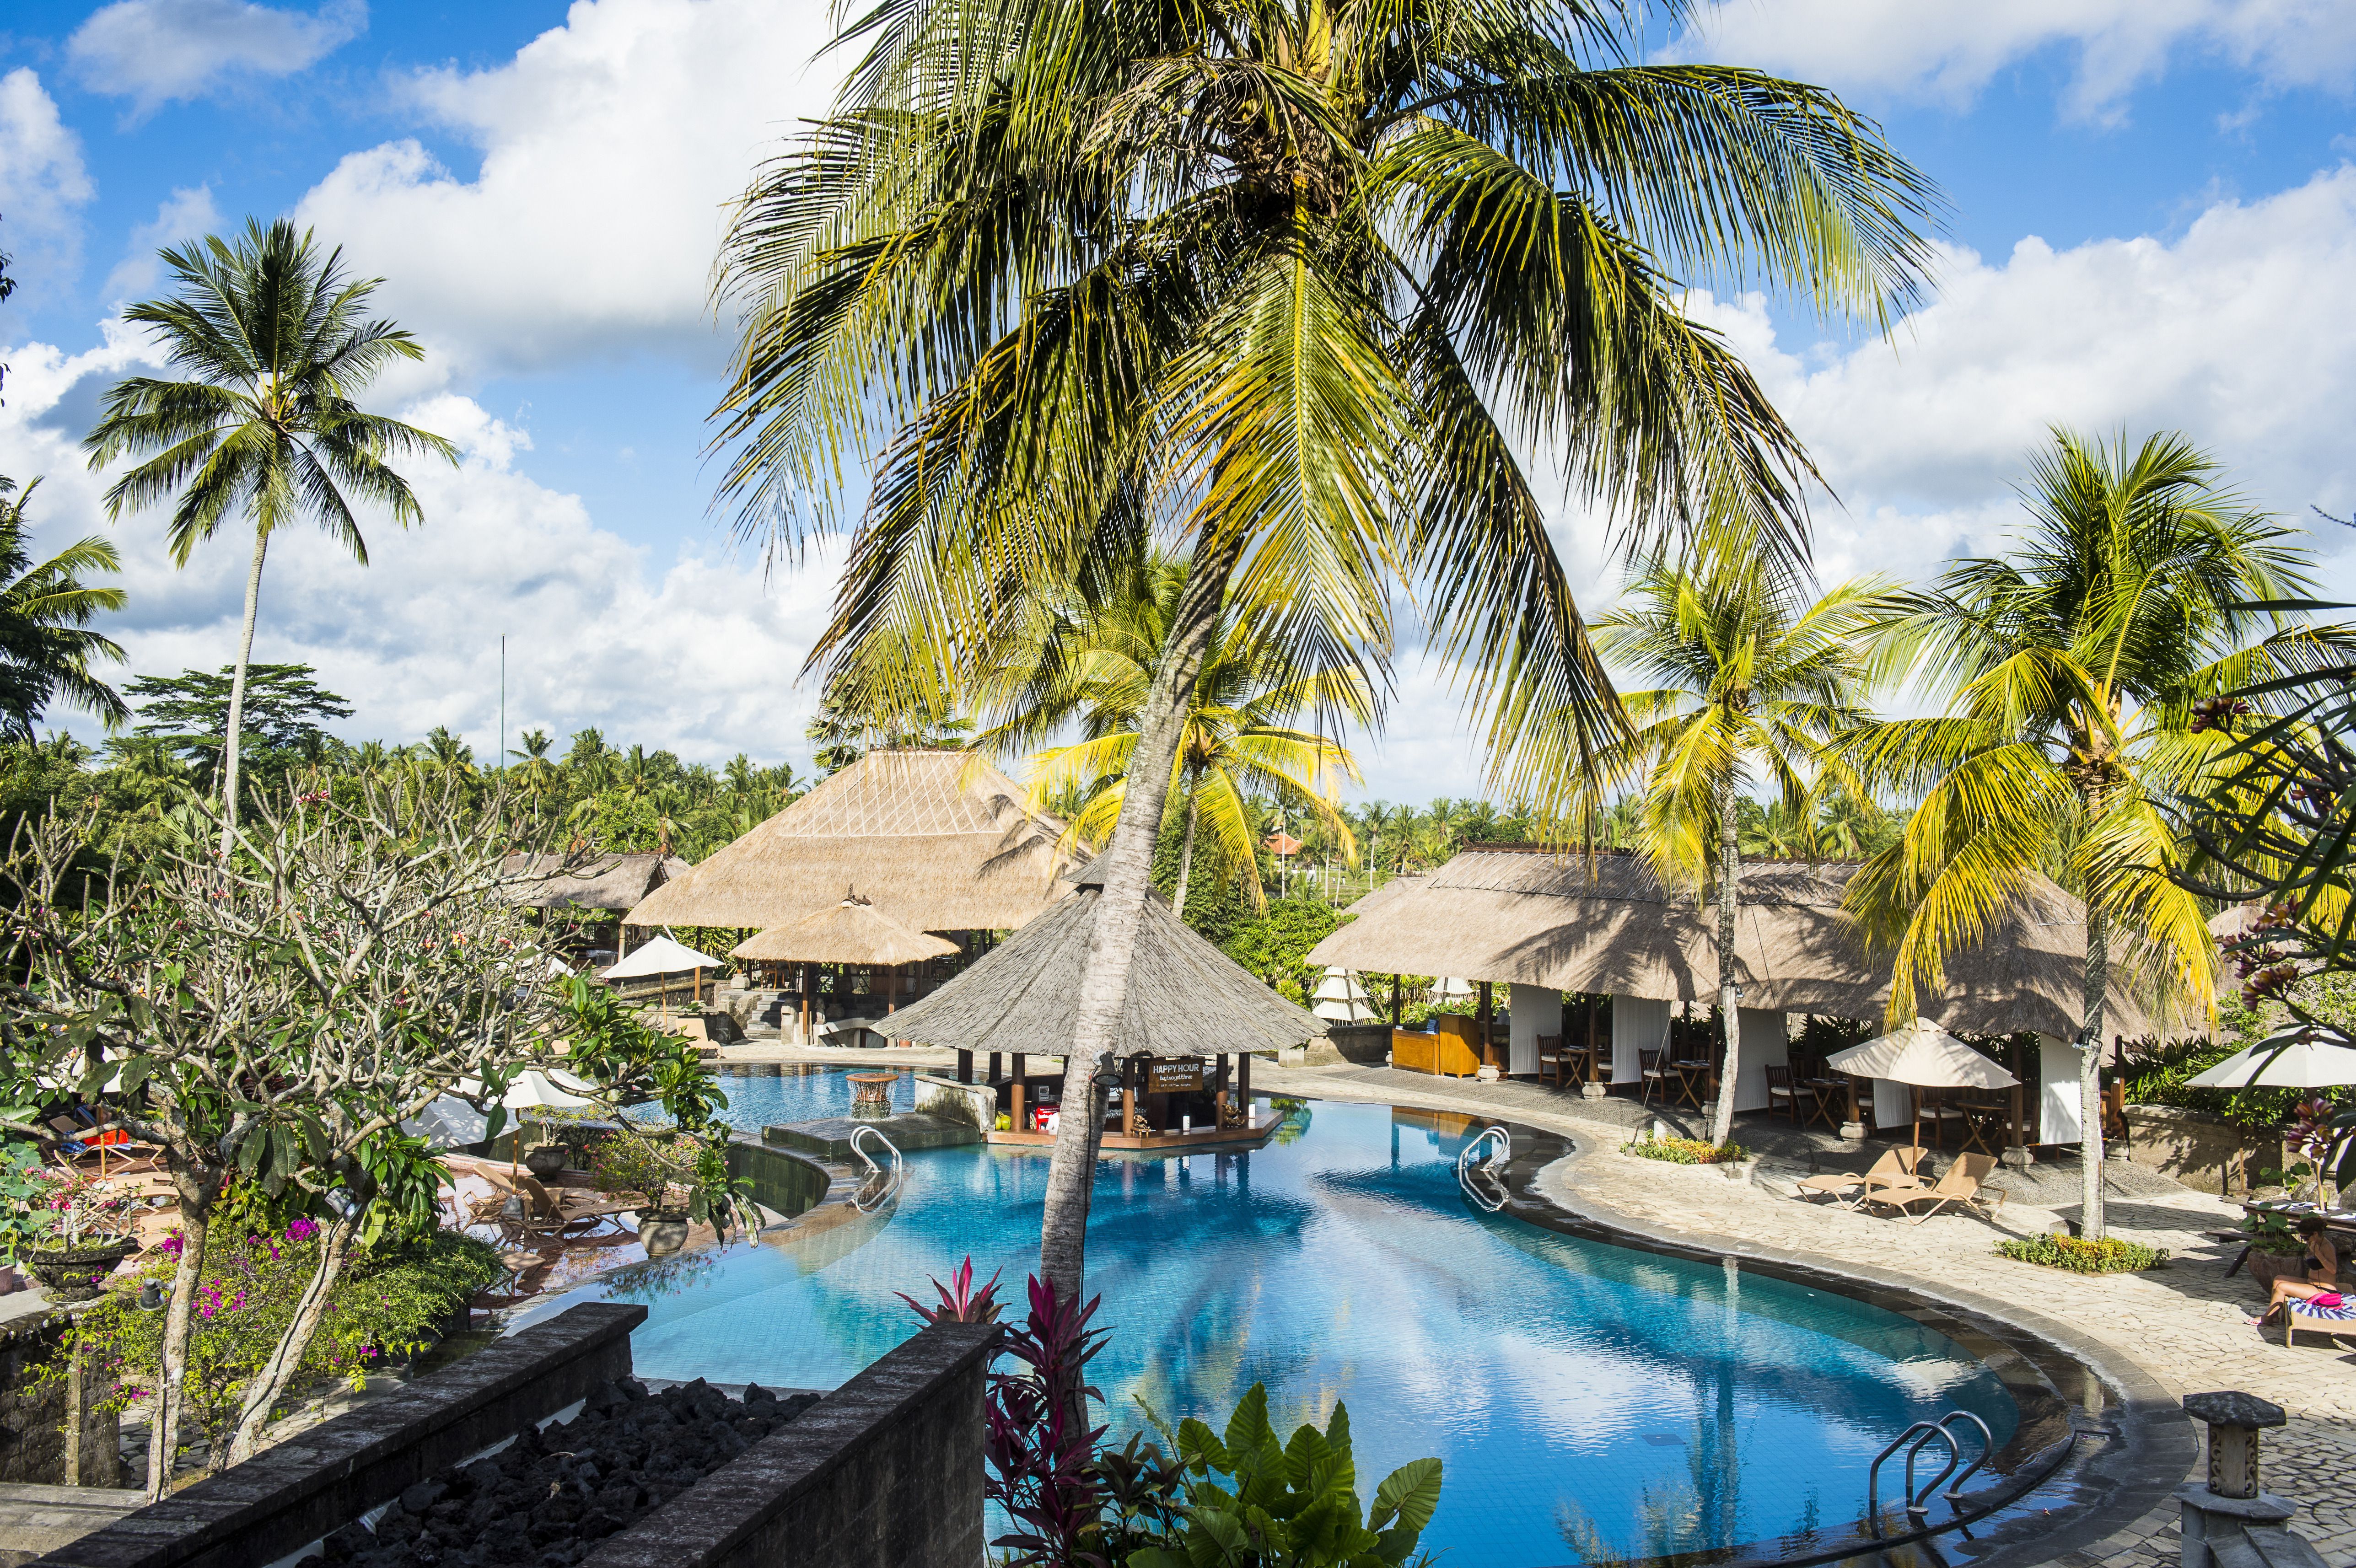 Before Booking a Hotel in Bali: Choosing the Best Accommodation